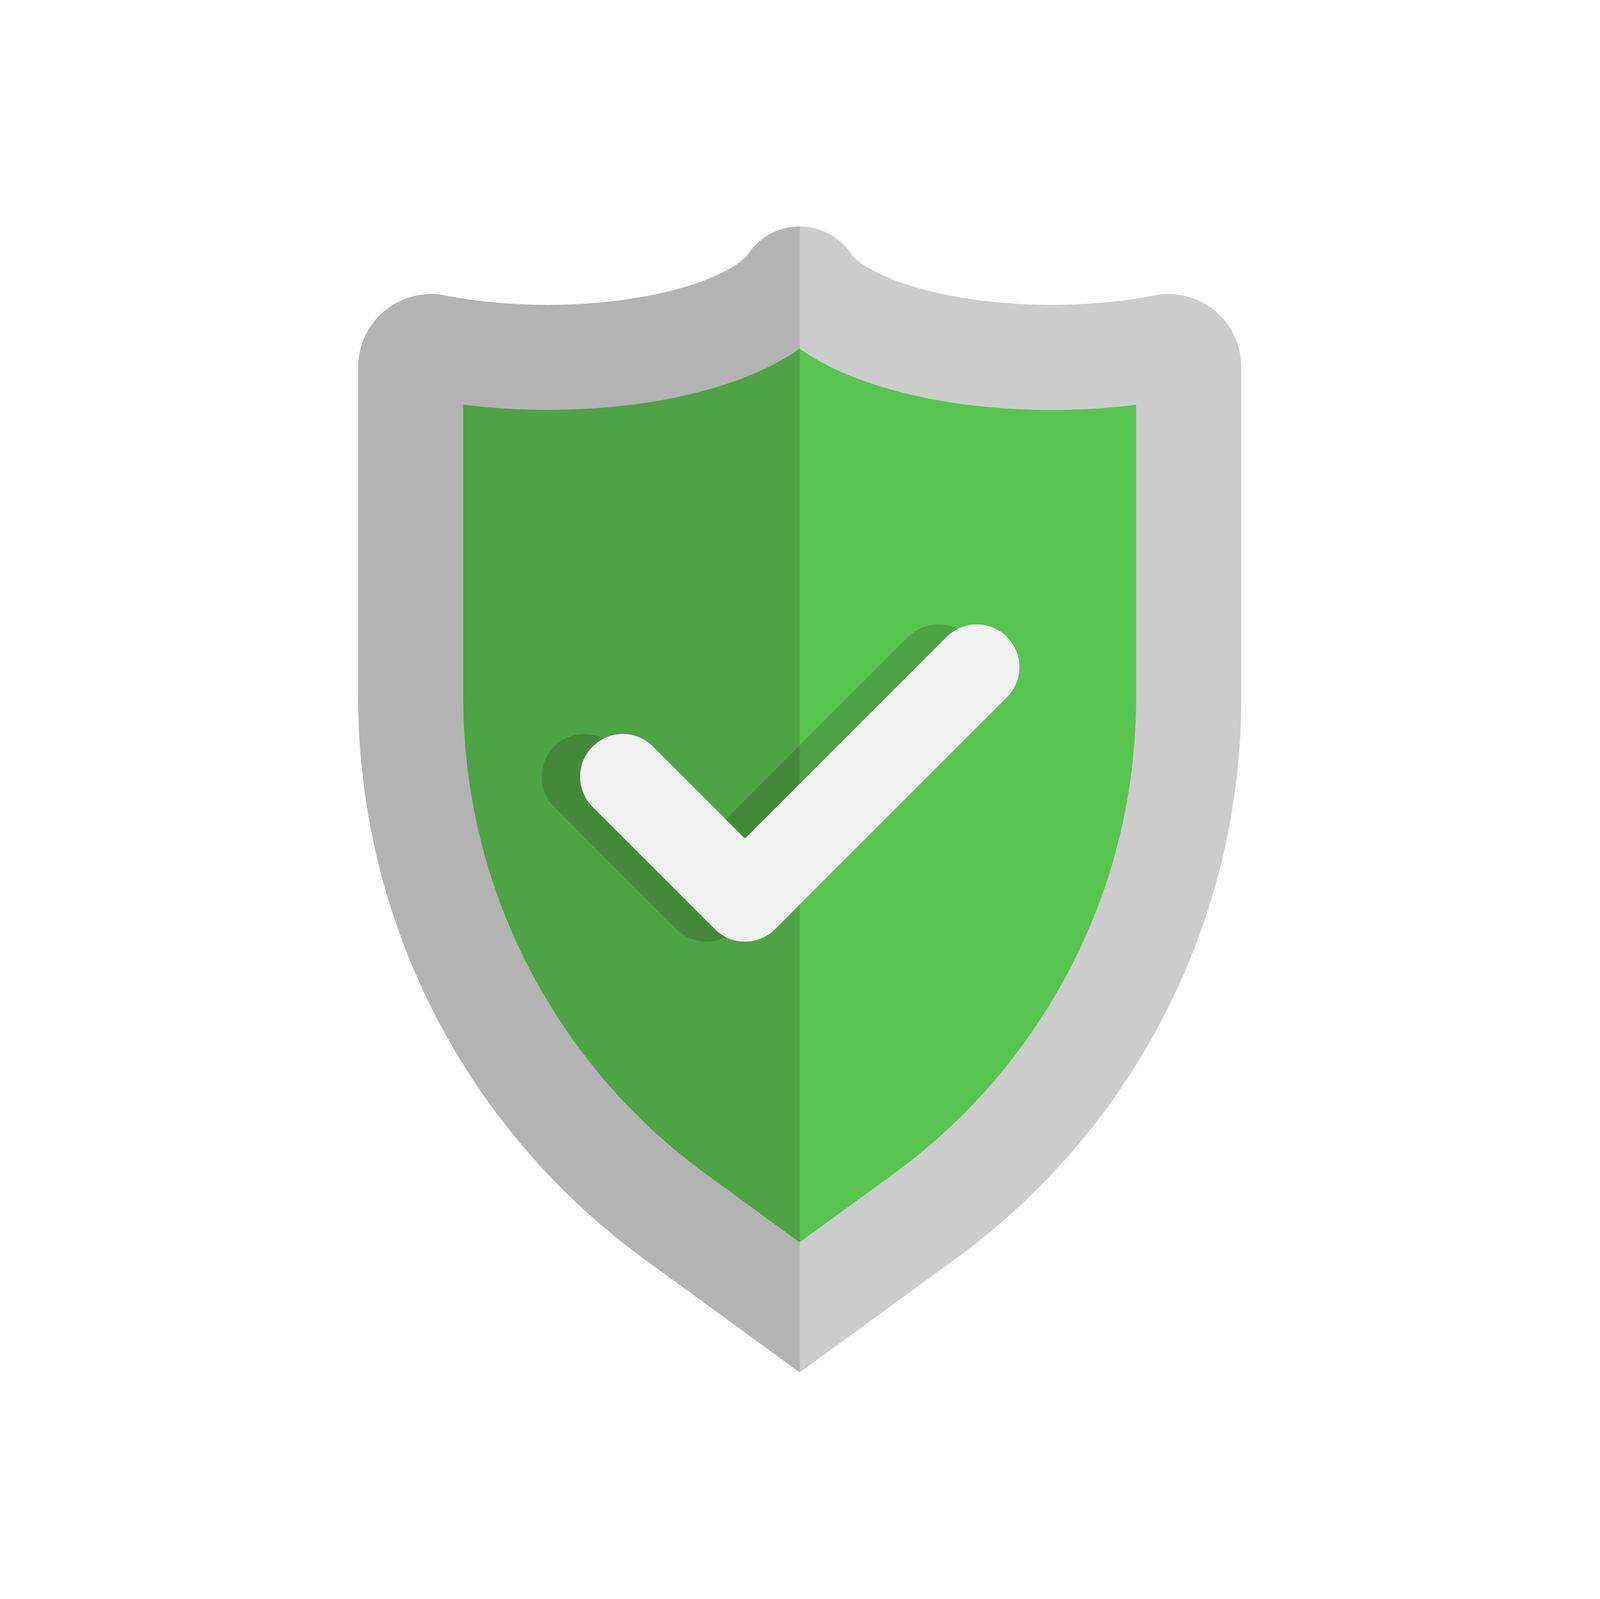 Green approval shield icon on white background by AdamLapunik